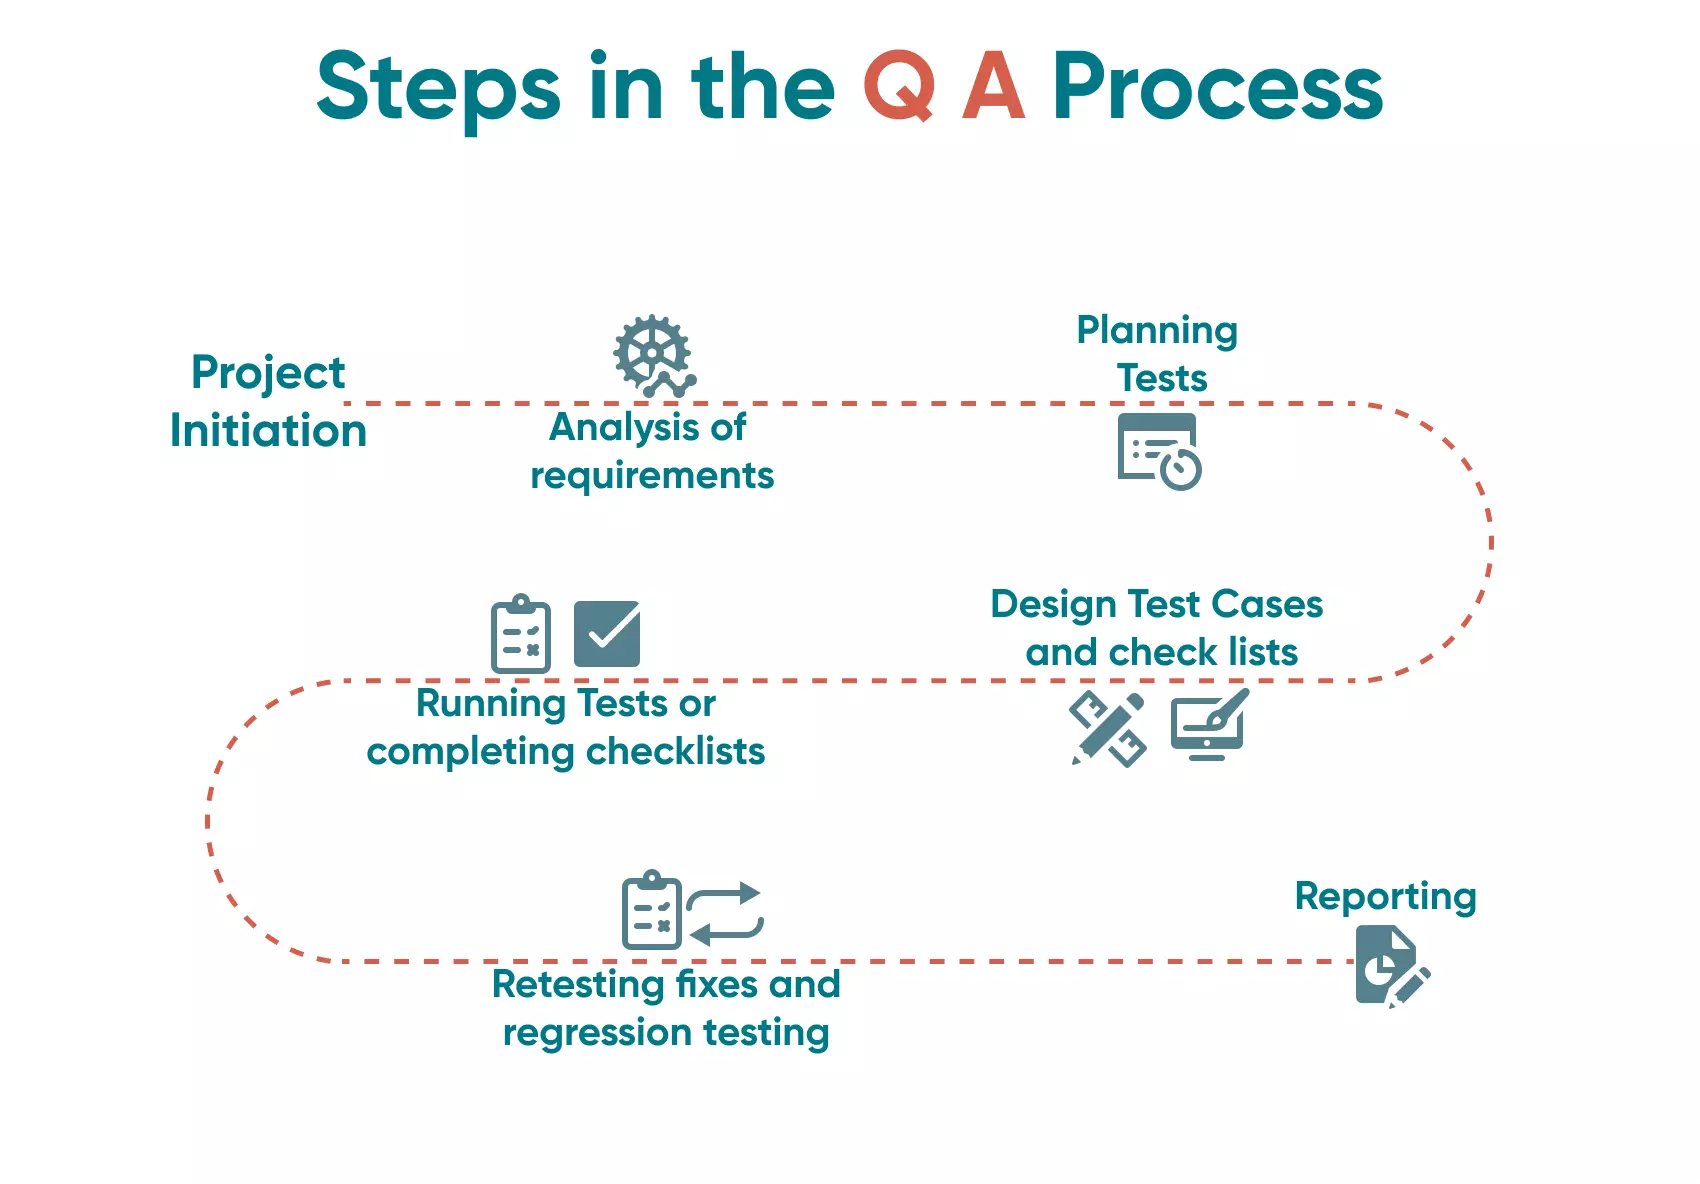 It is important to follow scheduled stages and actions. Standard operational procedures and activities are the secret to a successful QA process.